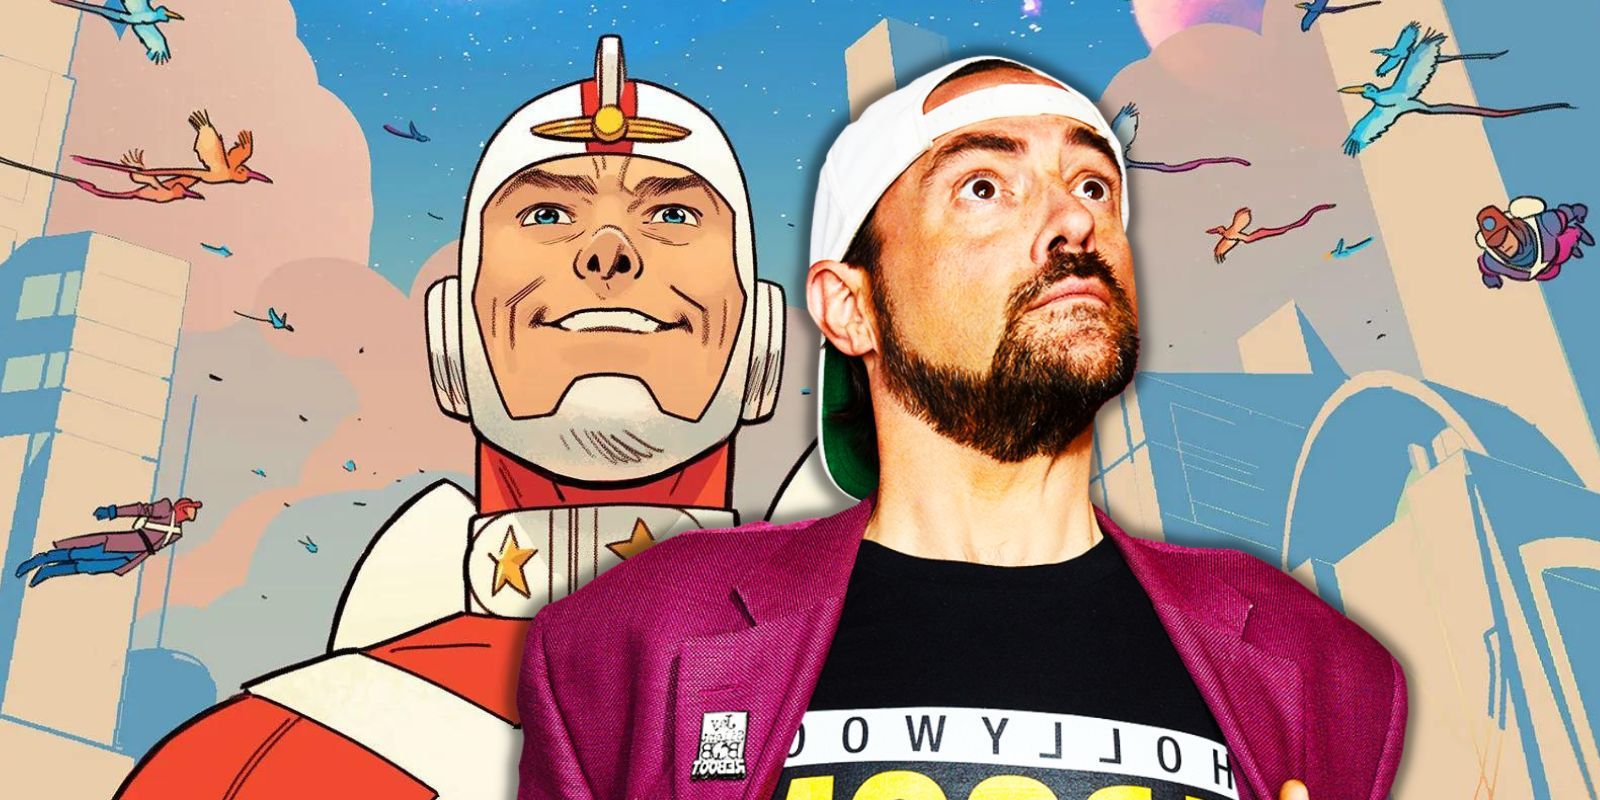 A Promotional Image of Kevin Smith for Strange Adventures Series